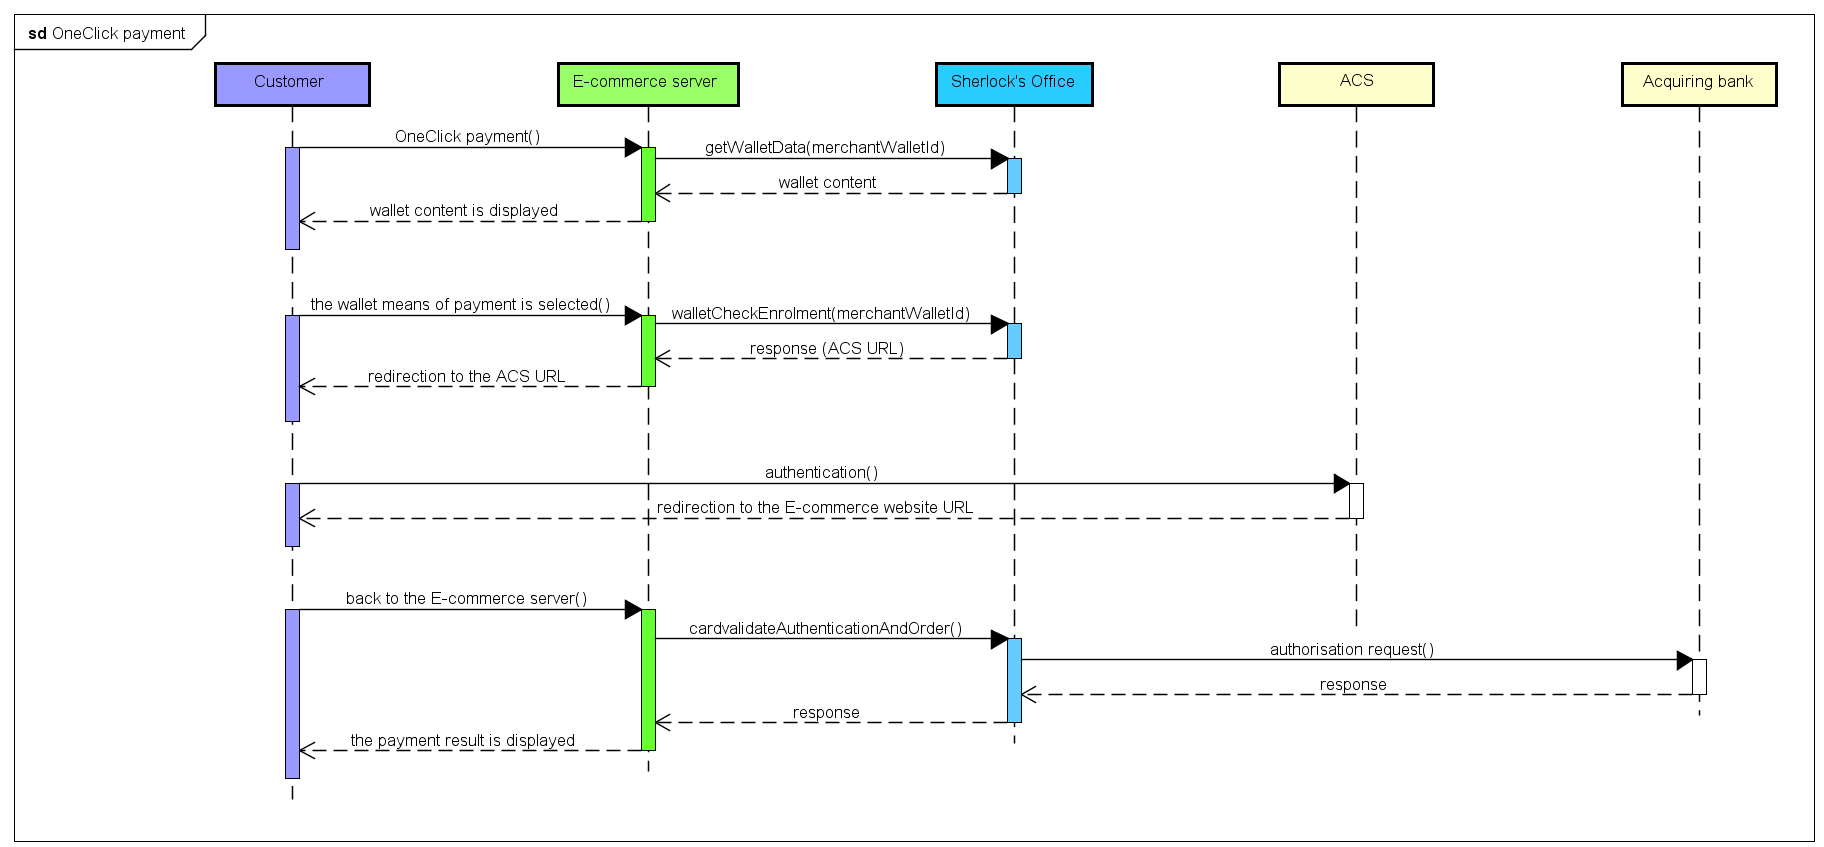 Flowchart of a OneClick payment via Office